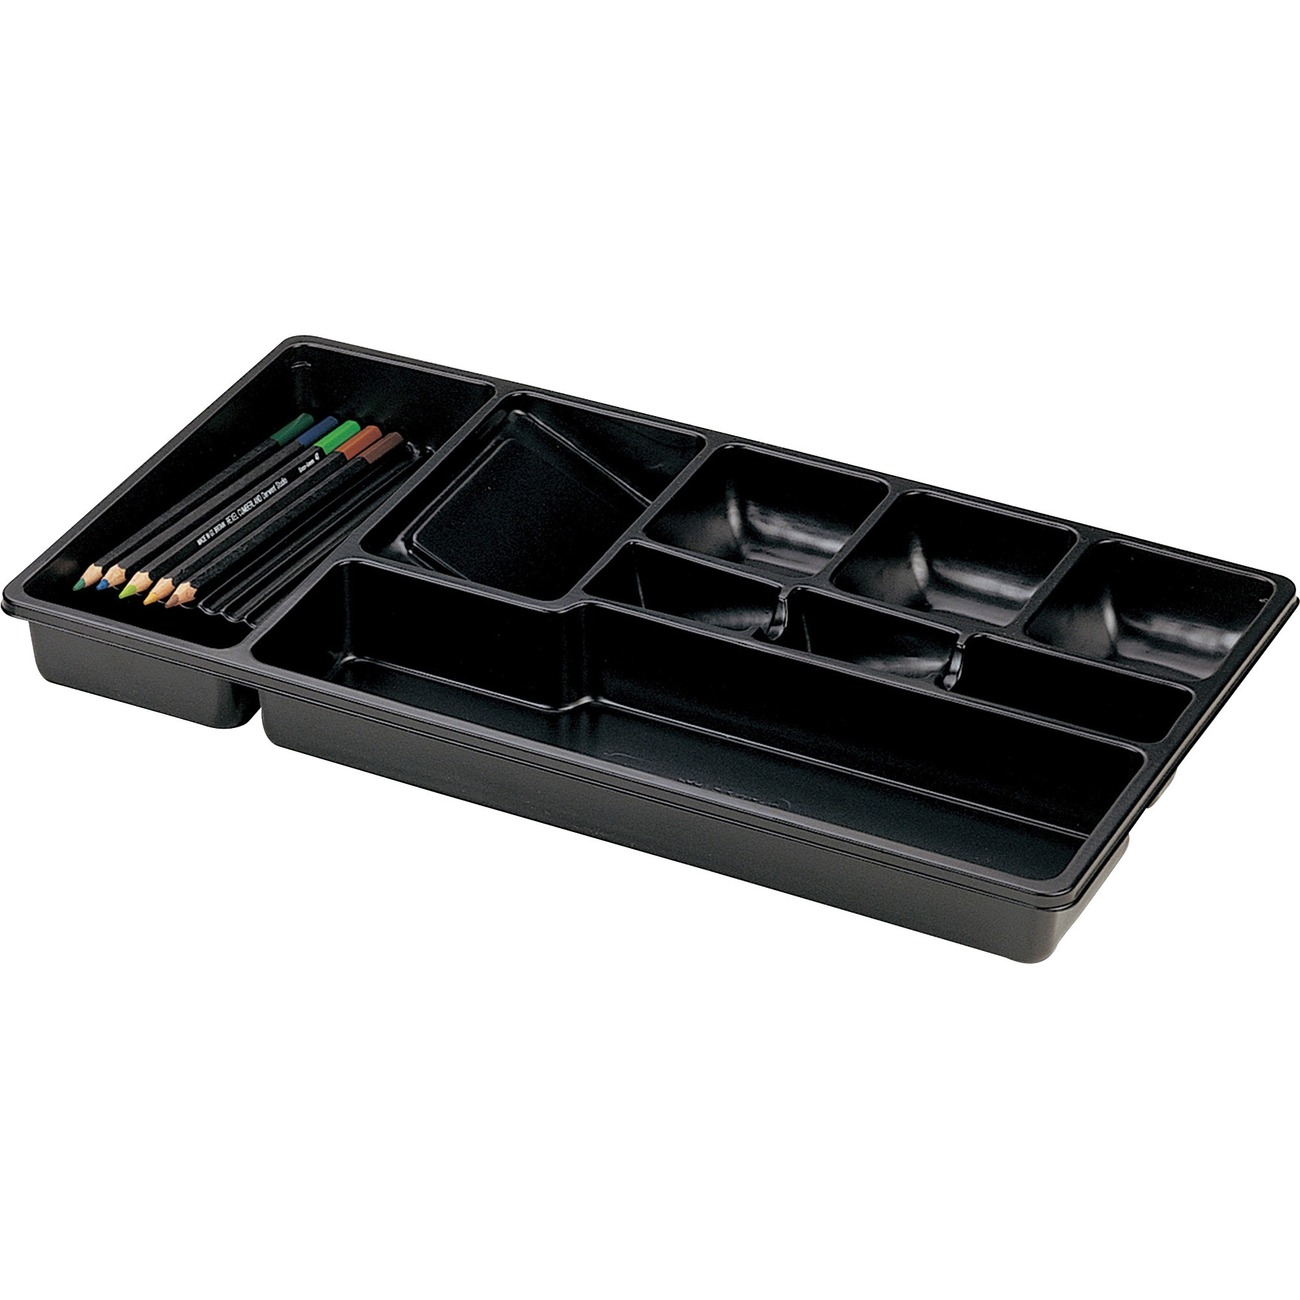 Officemate 21312 Oic Economy Drawer Tray Oic21312 Oic 21312